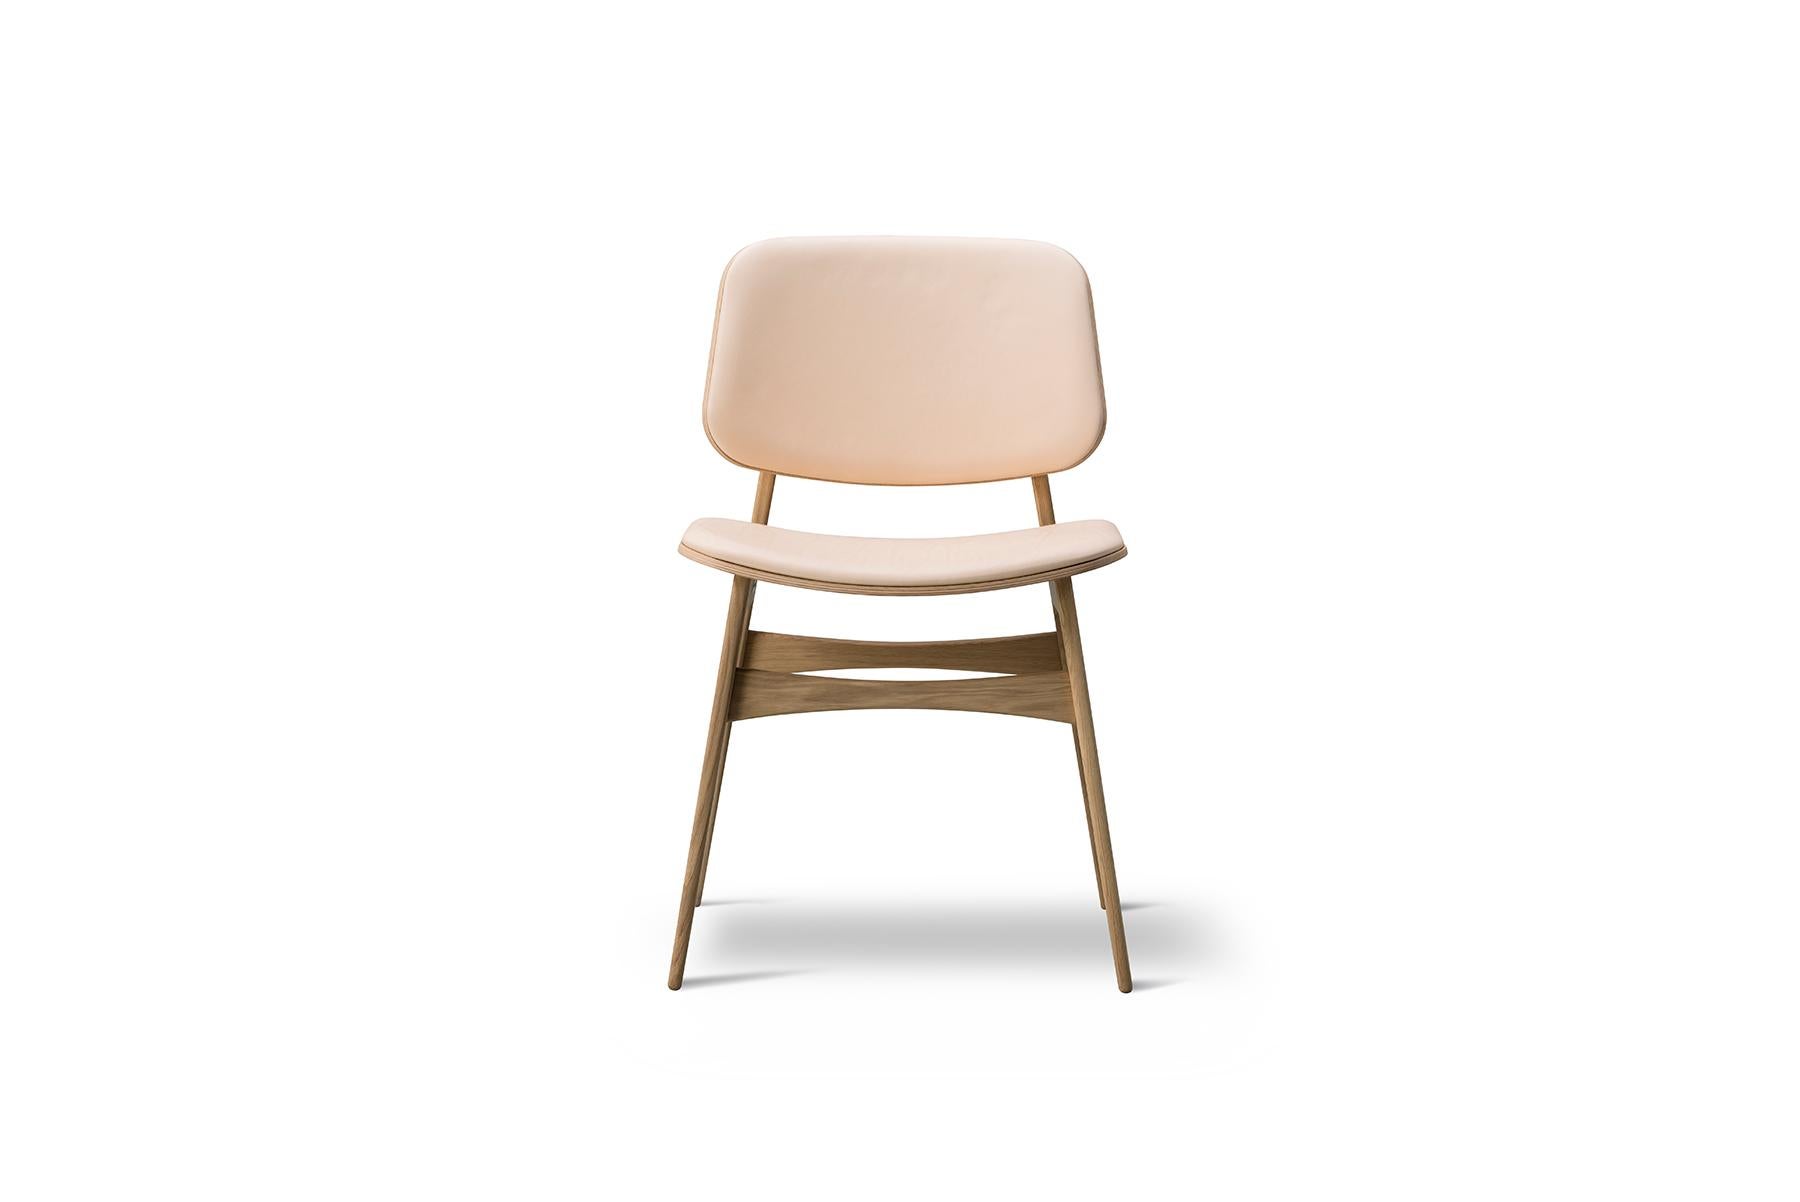 Mogensen presented the prototype for the Børge Mogensen Soborg Chair in 1950. His intention was to fuse plywood shells with his signature solid wood functionalism. The generous back and seat with optional upholstery provides for many hours of use.